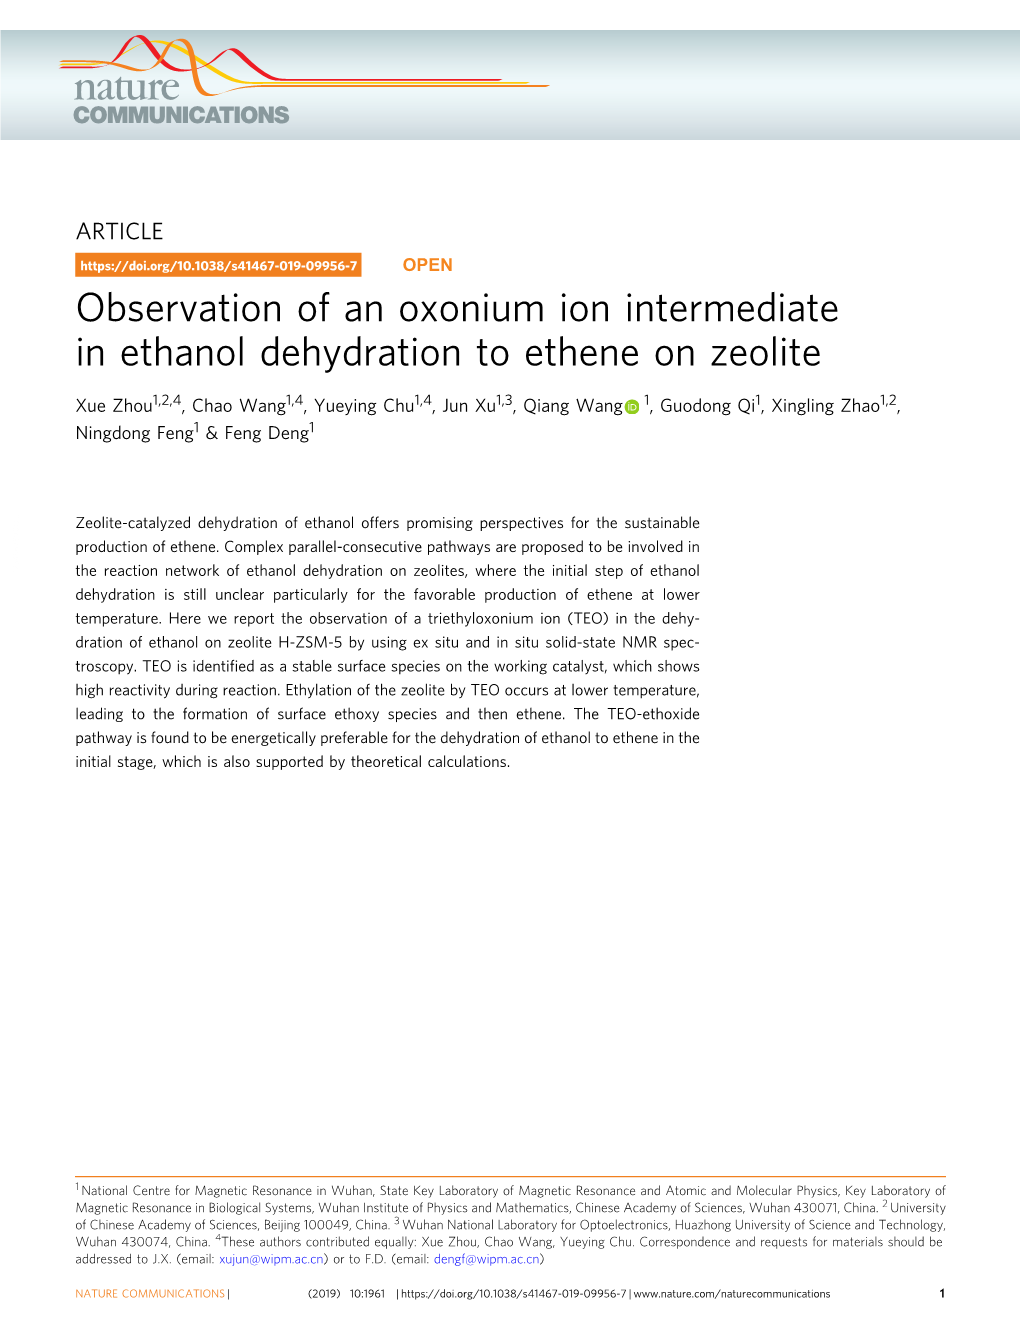 Observation of an Oxonium Ion Intermediate in Ethanol Dehydration to Ethene on Zeolite